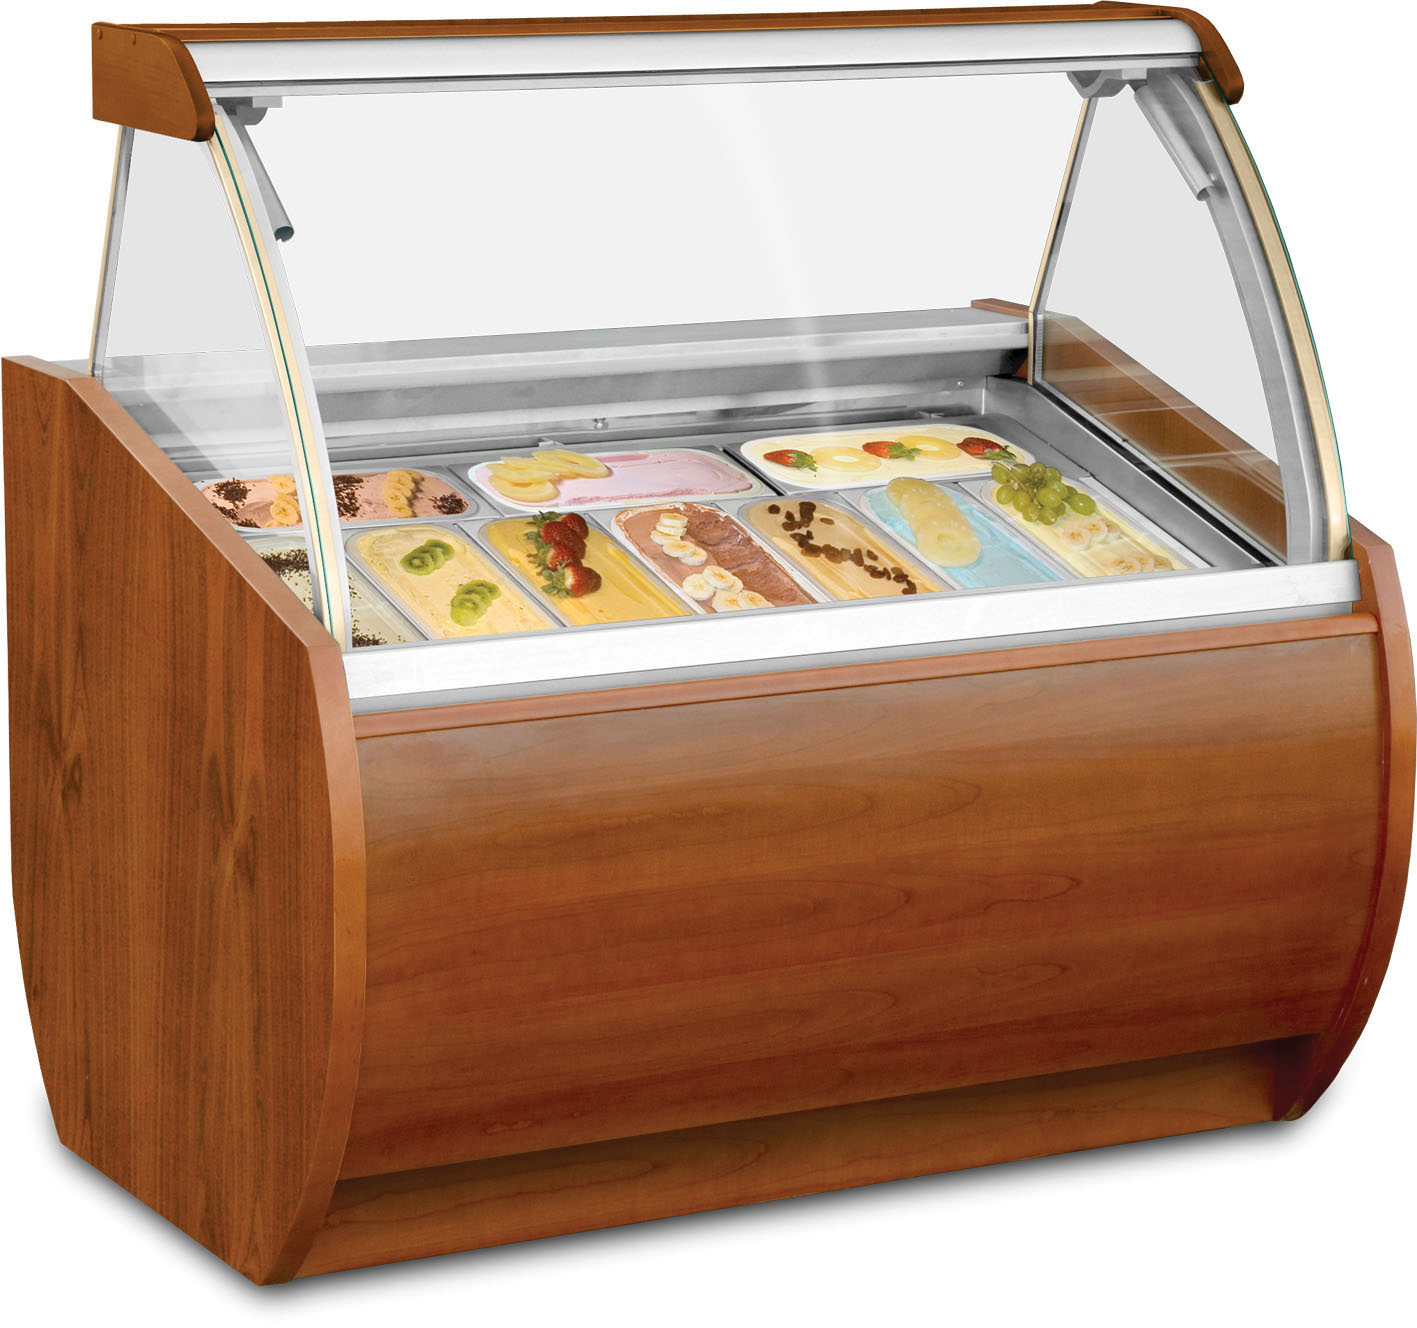 An image of Igloo ARUBA2 Ice Cream Display Freezer-24 Months Parts and 12 Months Labour-1375...